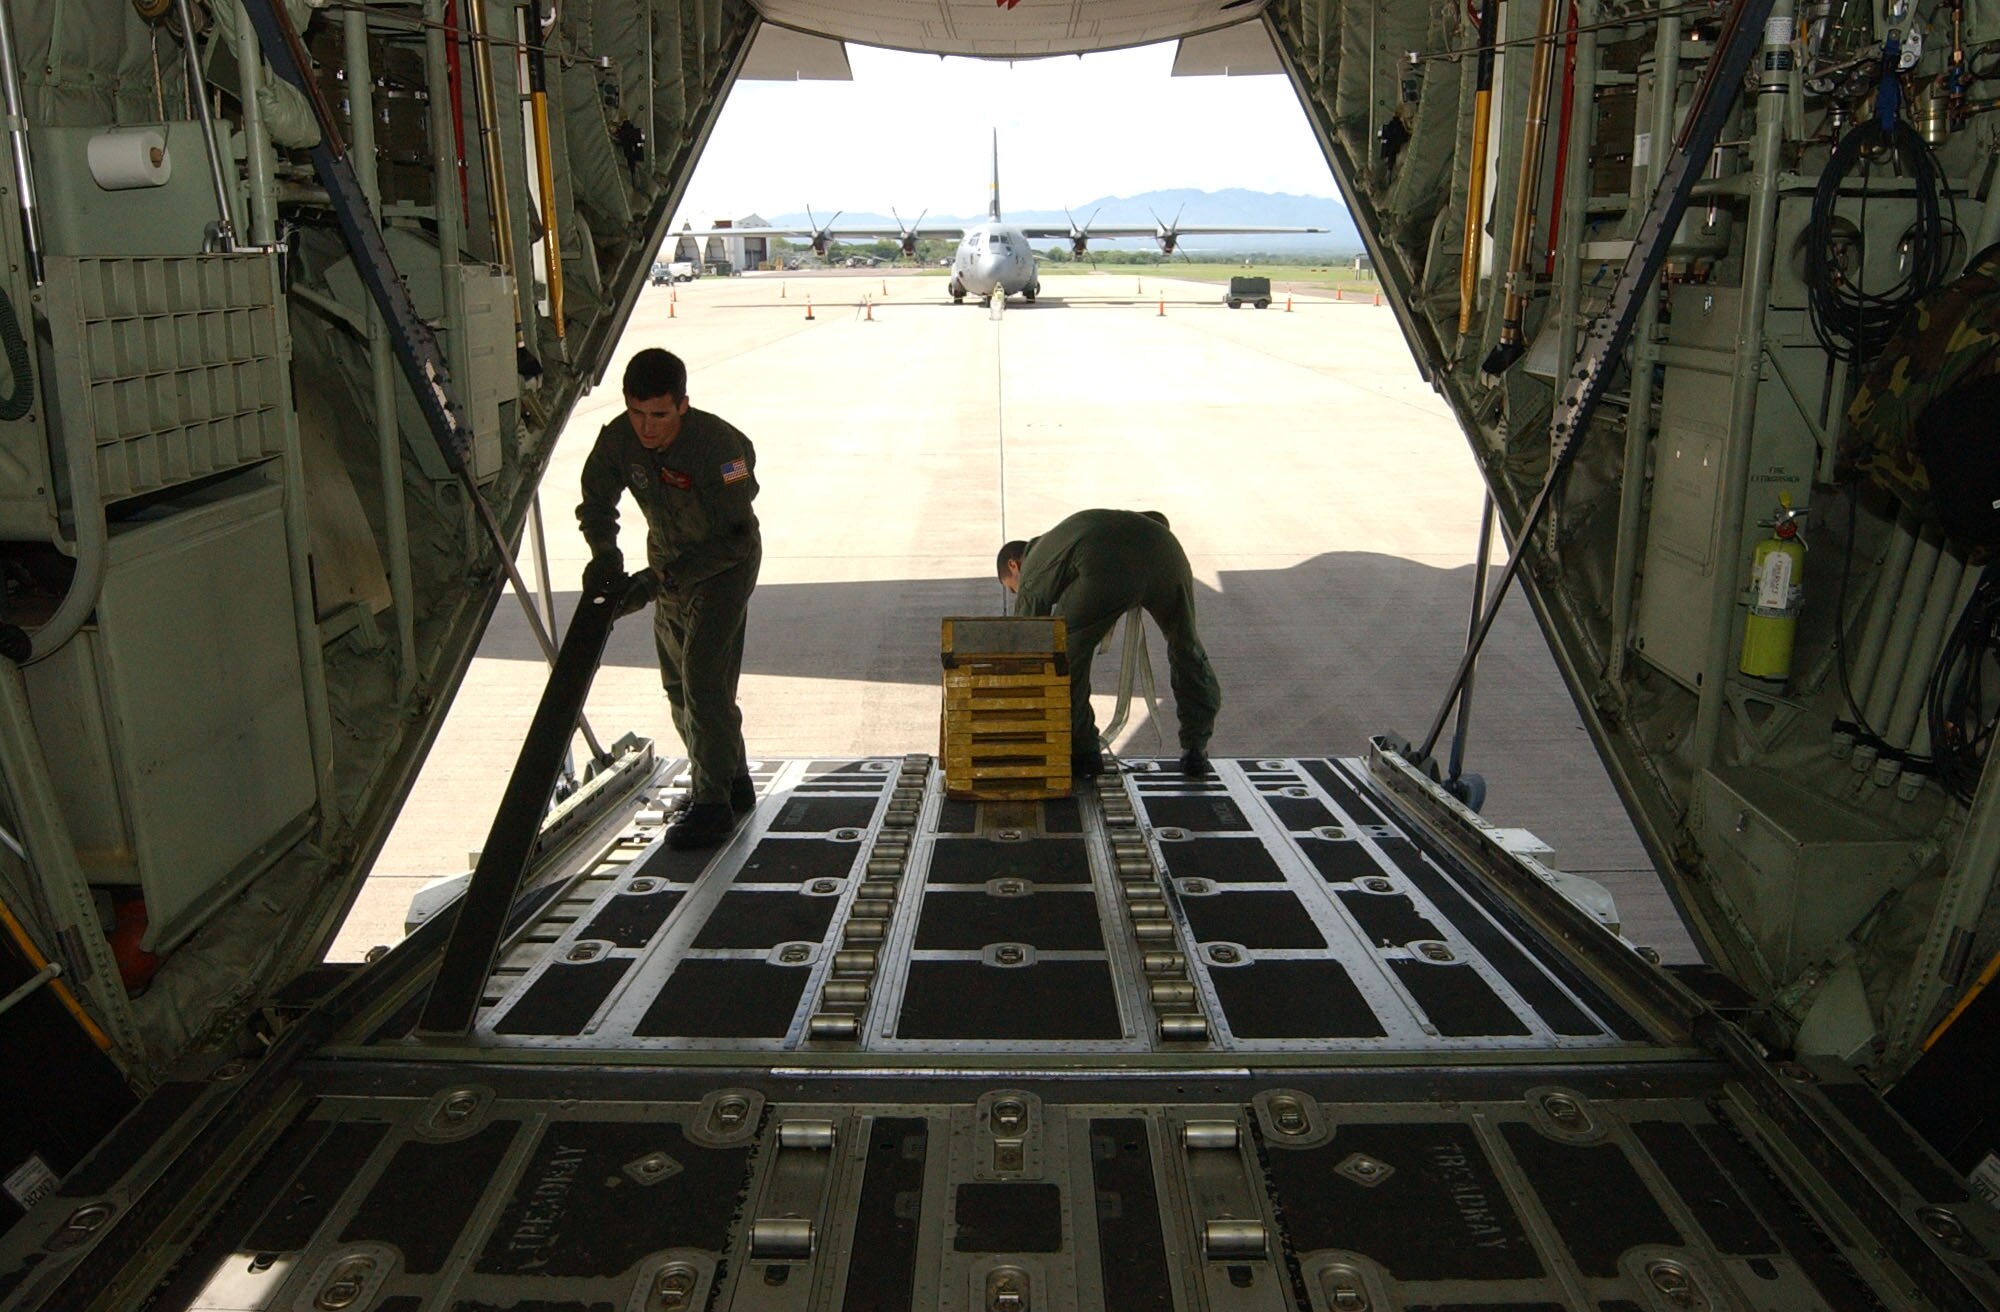 SOTO CANO AIR BASE, Honduras – Senior Airman Brandon Krantz, left, and Tech. Sgt. Will Morales, both loadmasters with the 135th Airlift Squadron, Maryland Air National Guard, configure the interior of a C-130J prior to a relief mission to Peru Aug. 17. Approximately 30 Soldiers and Airmen are responding to the Aug. 15 earthquake in Peru and are taking with them 4,470 pounds of medical supplies for relief efforts.  (US Air Force photo by Tech. Sgt. Sonny Cohrs)